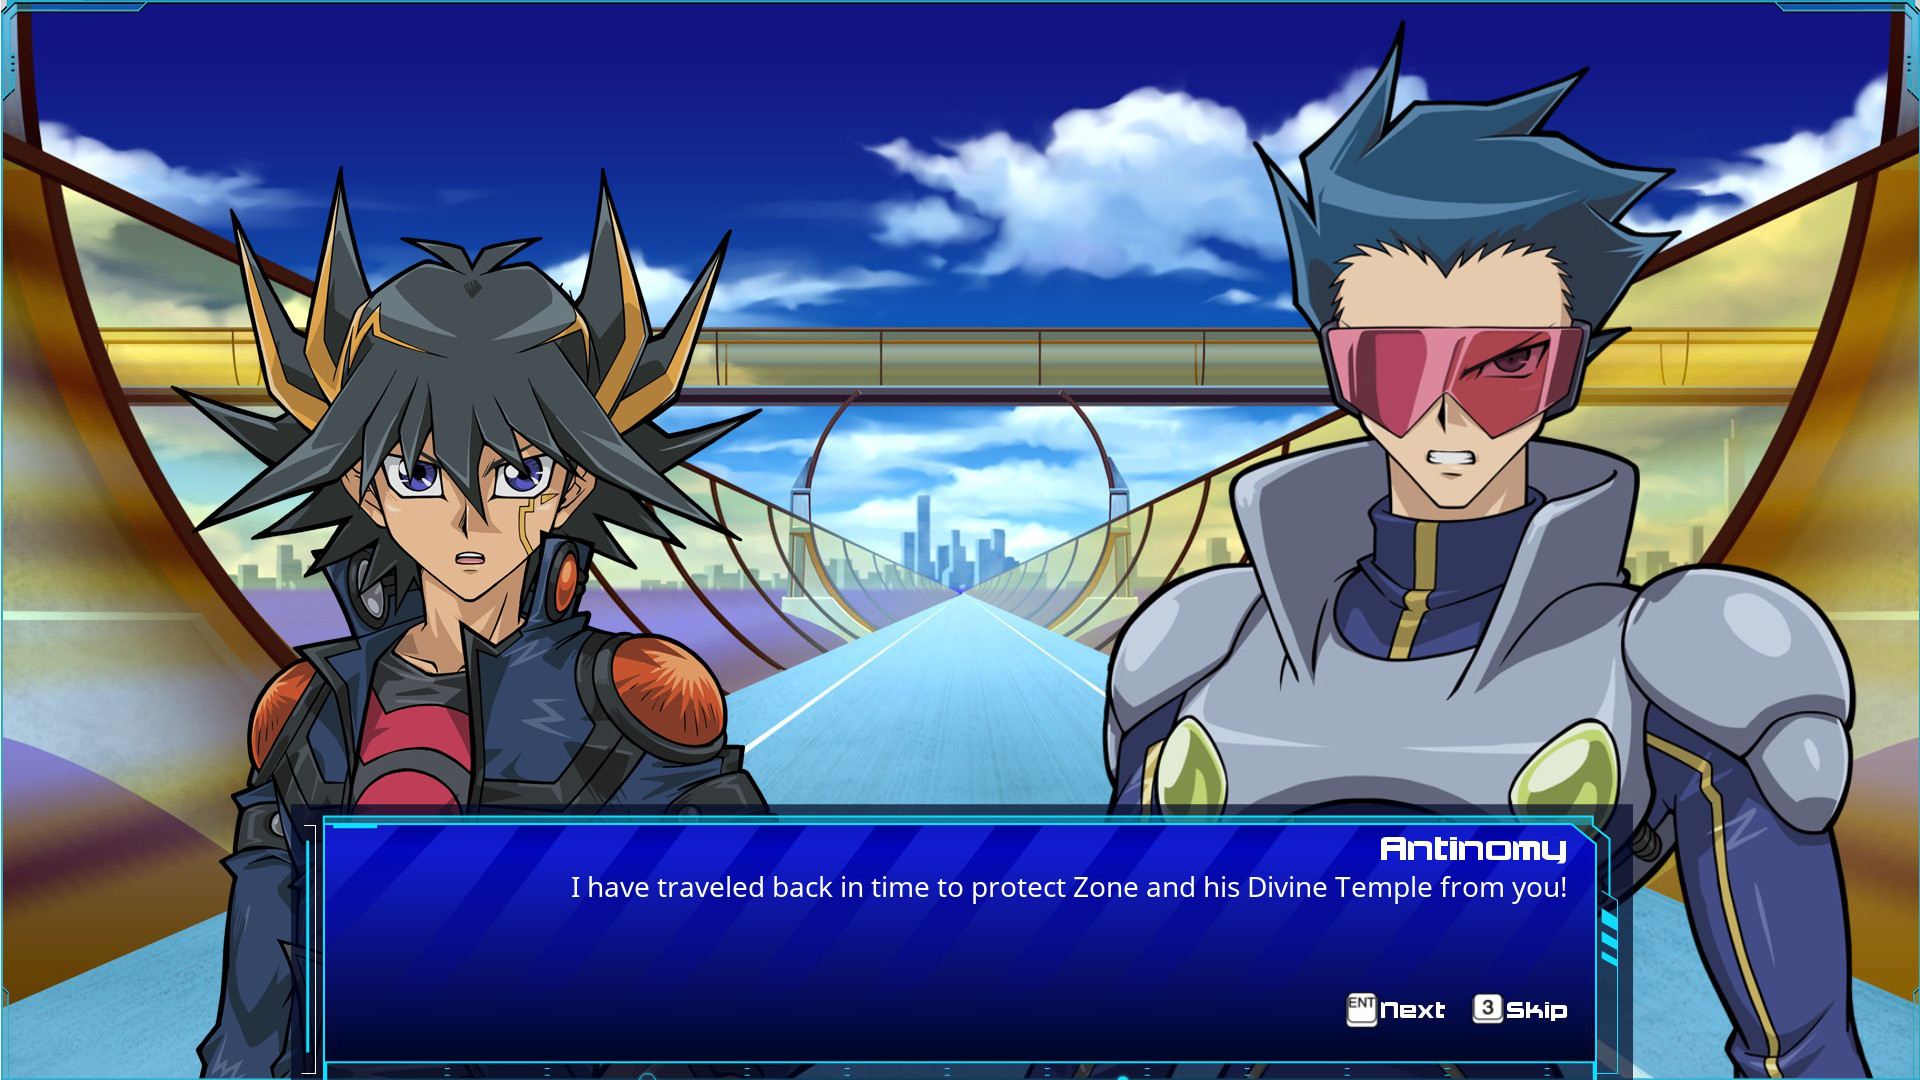 Yu-Gi-Oh! - 5D’s For the Future DLC Steam CD Key 1.04$